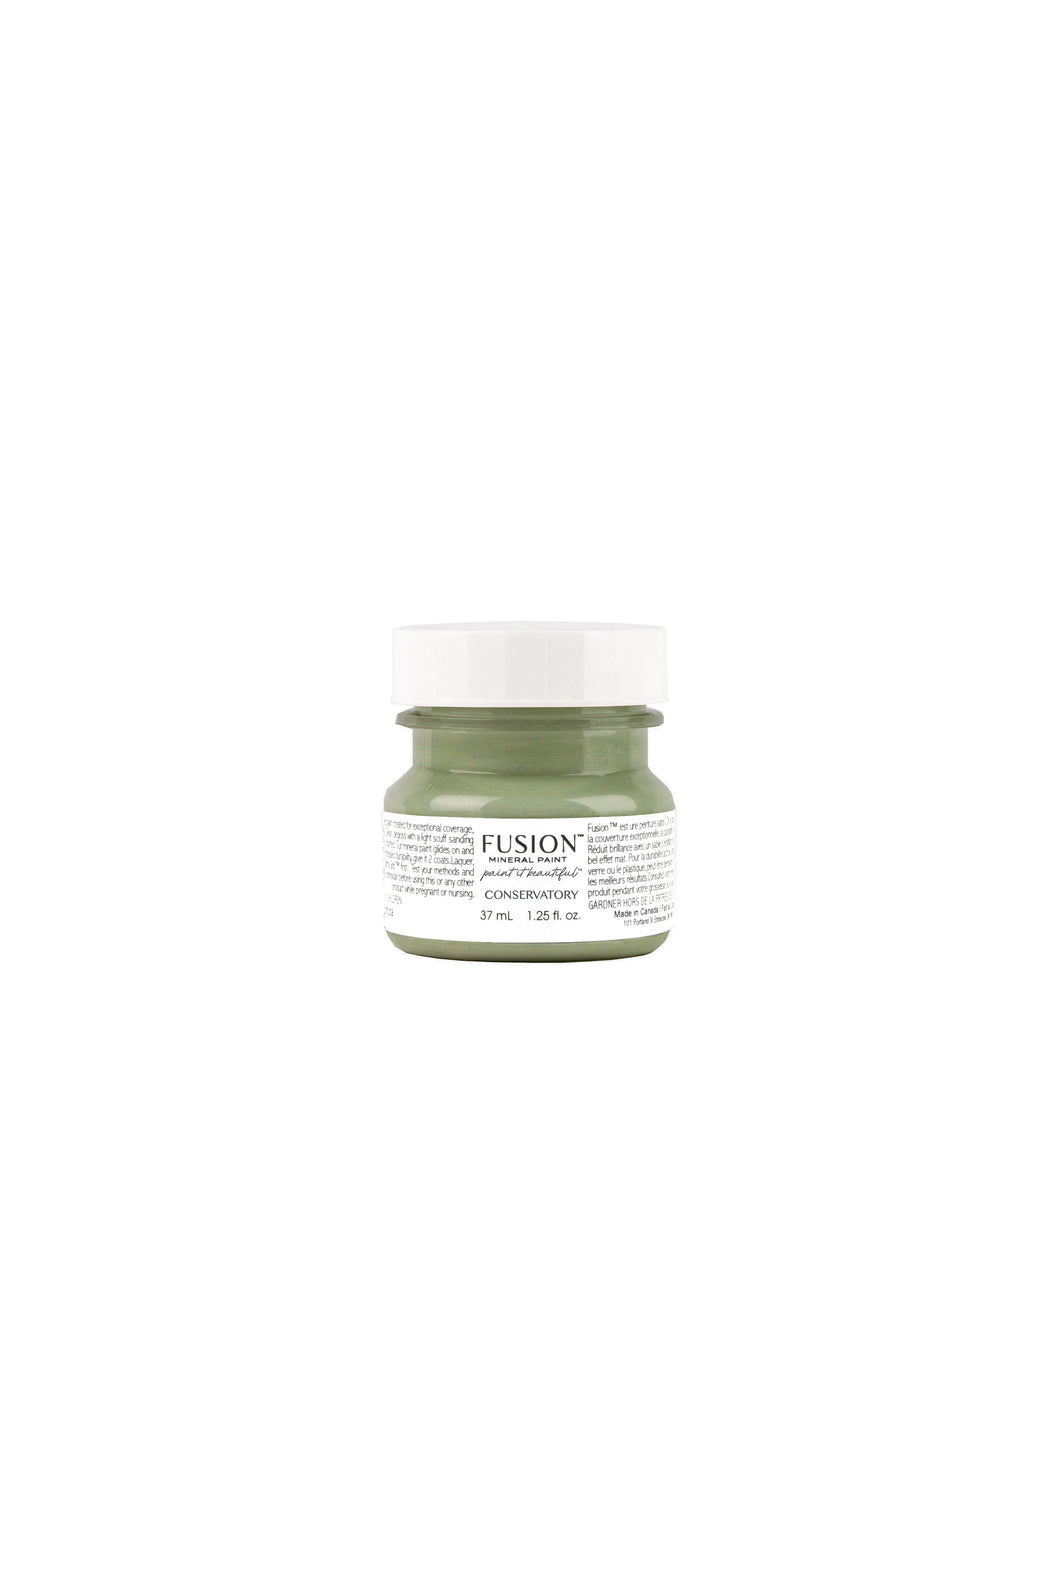 Fusion Mineral Paint - Conservatory 37 ml Jar